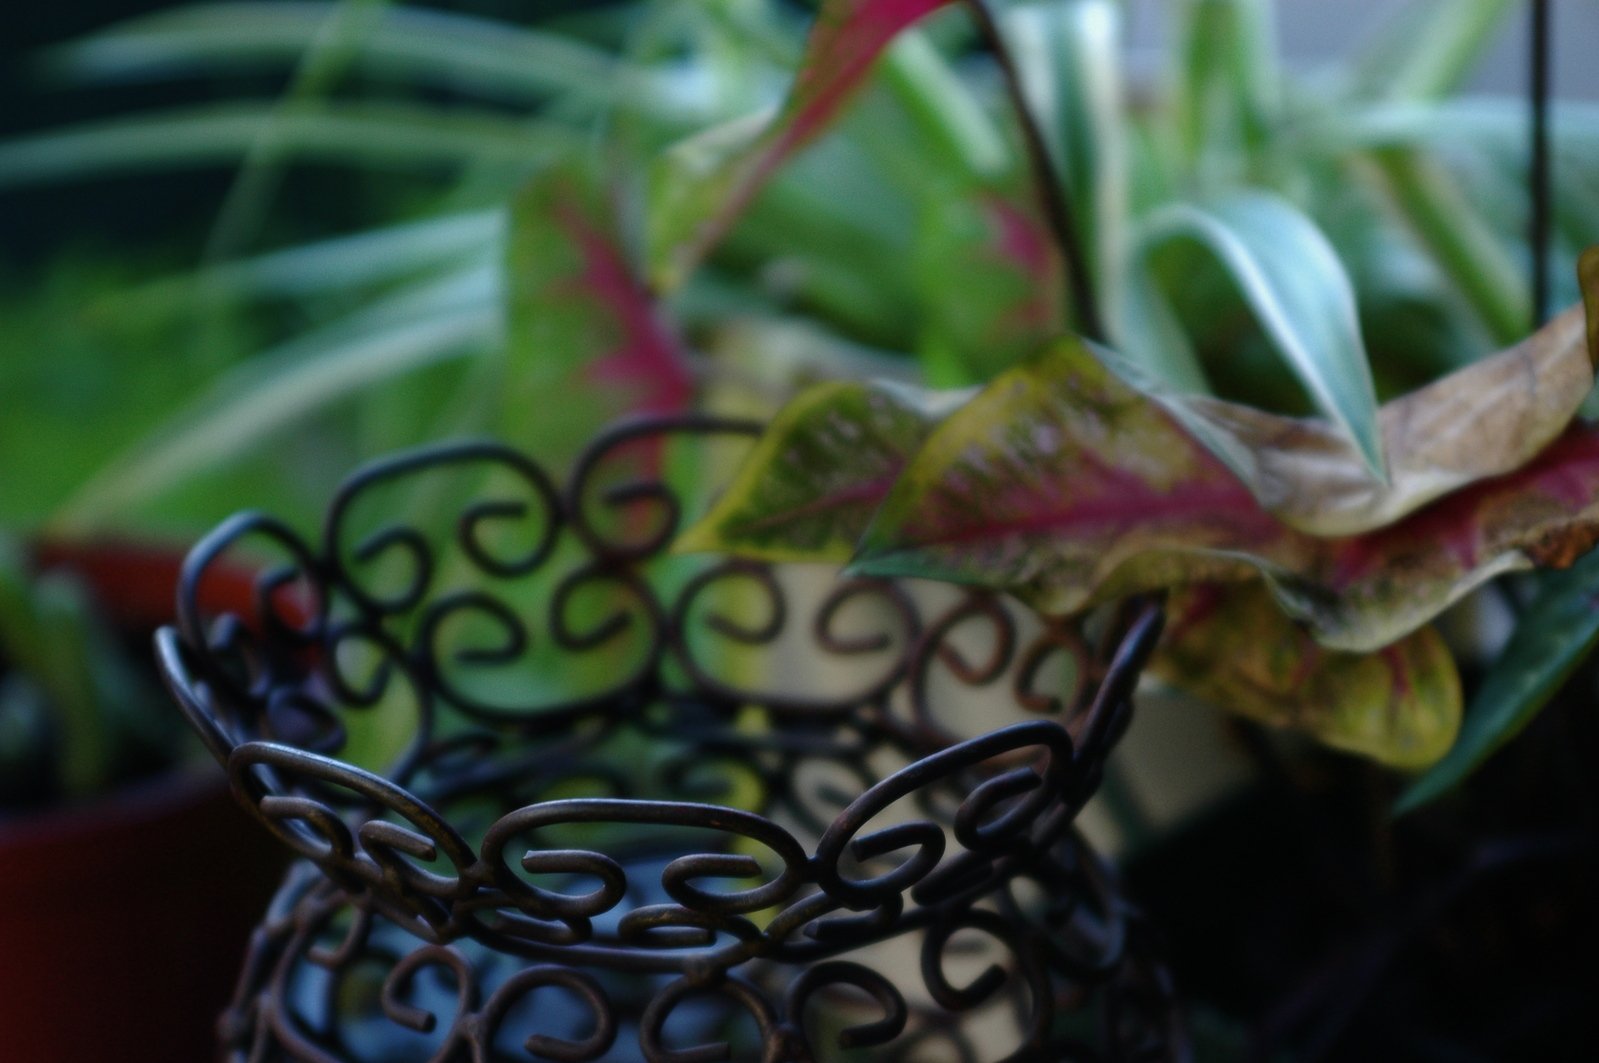 a wire basket on the ground beside a potted plant